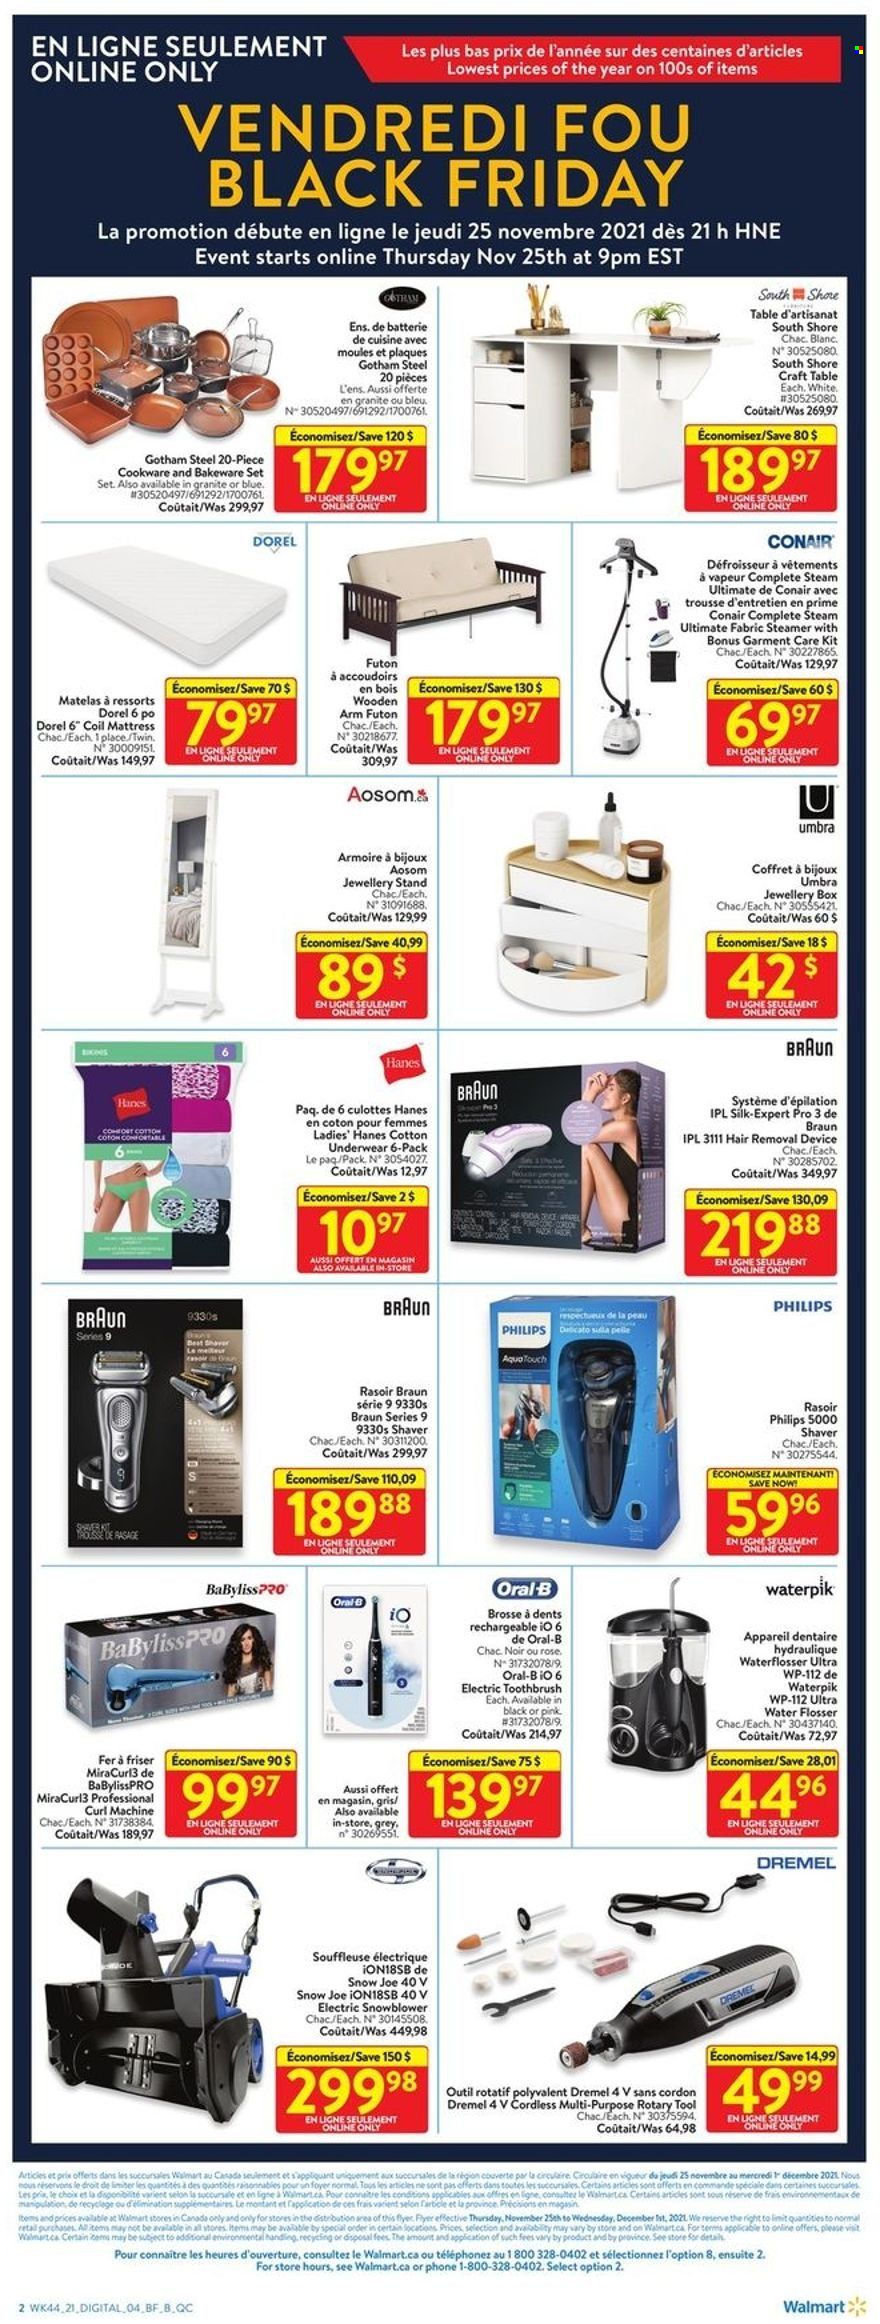 thumbnail - Walmart Flyer - November 25, 2021 - November 28, 2021 - Sales products - Philips, Silk, wine, rosé wine, toothbrush, hair removal, shaver, cookware set, bakeware, electric toothbrush, table, mattress, underwear, Garment Care, snow blower, rose, Babyliss, Braun, Oral-B. Page 10.